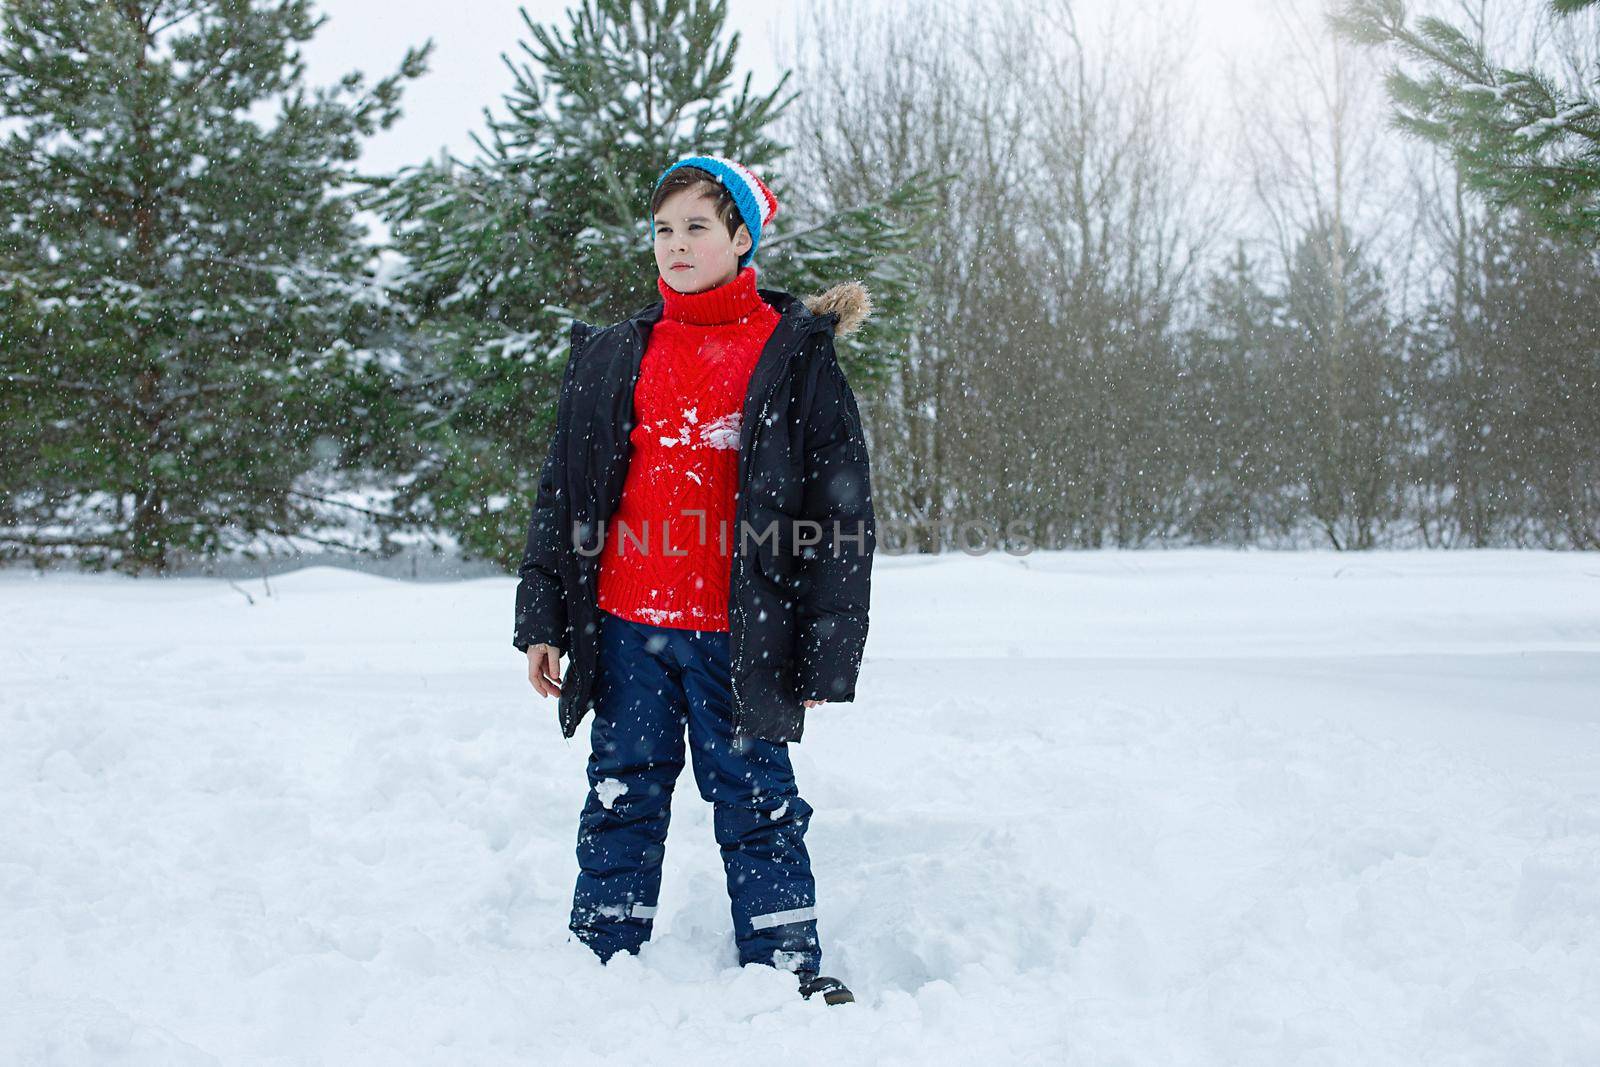 A cute teenager boy in a dark jacket, hat and a red sweater stands in a winter park on the snow